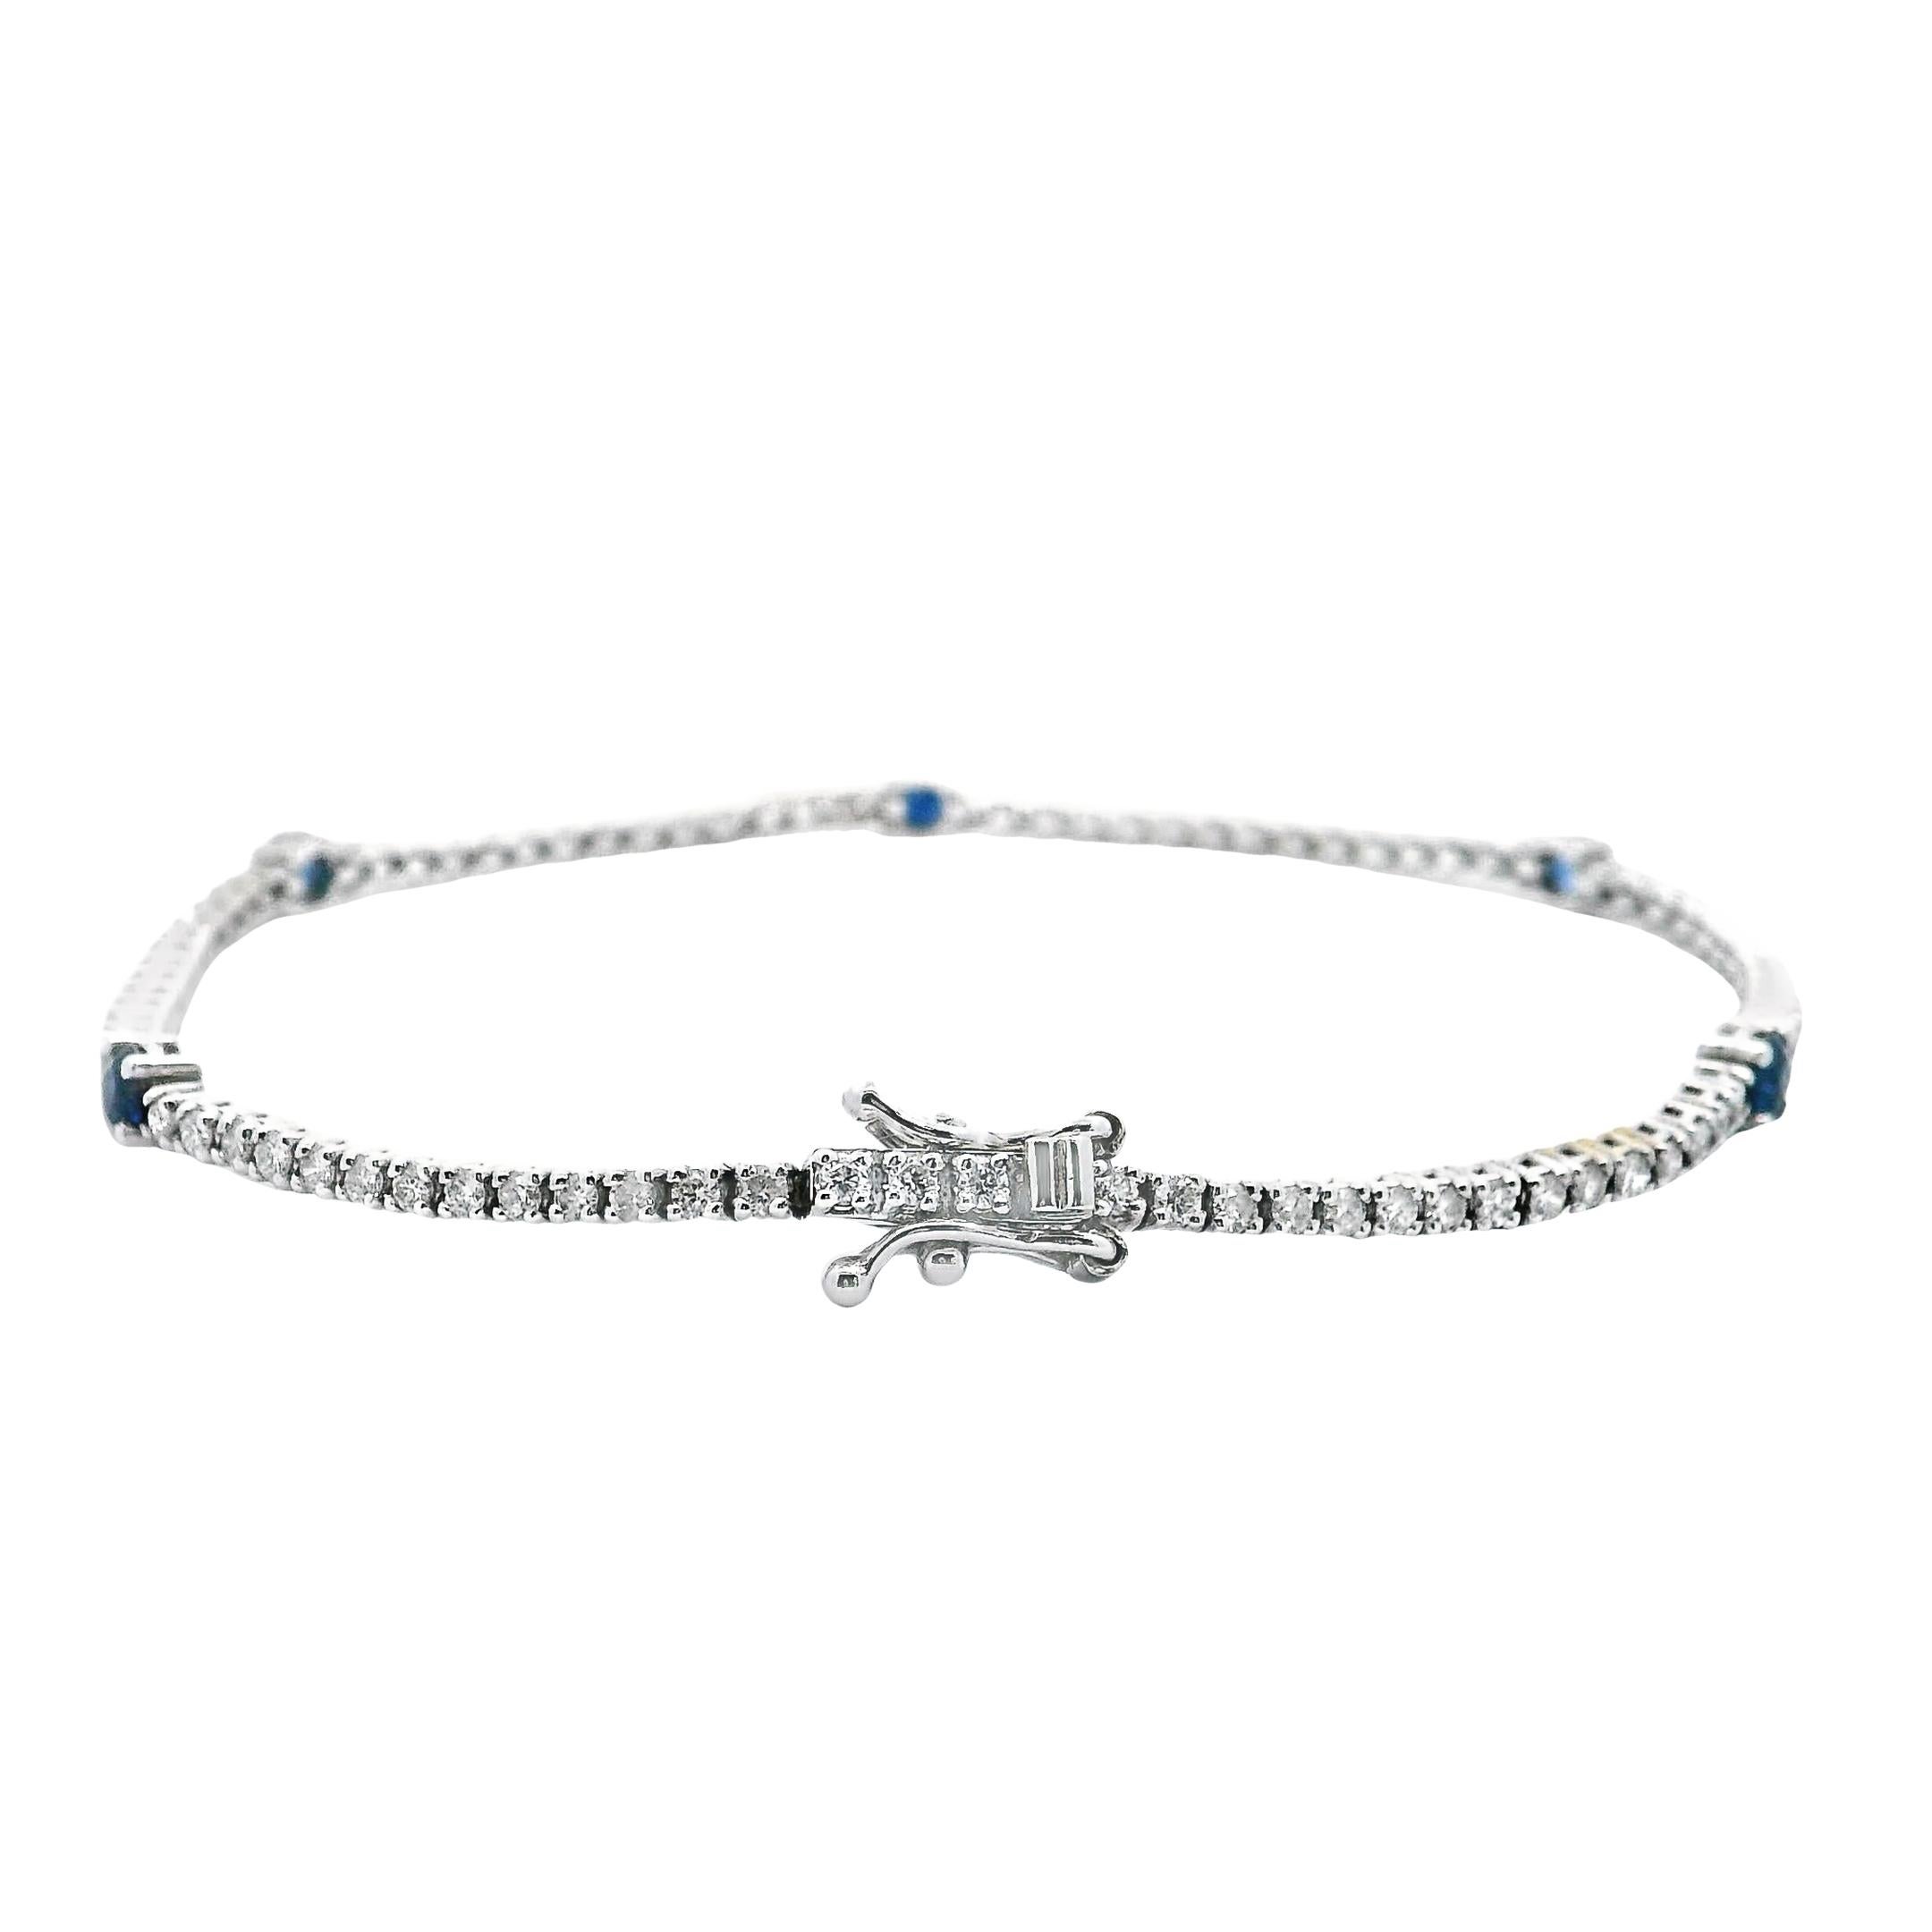 14K white gold tennis bracelet with 87 round brilliant-cut diamonds weighing 1.50 carats total and 5 round faceted blue sapphires 0.75 carats total.

- 7 inches long.
- Diamonds are H color, SI clarity.
- Double figure 8 safety clasp.